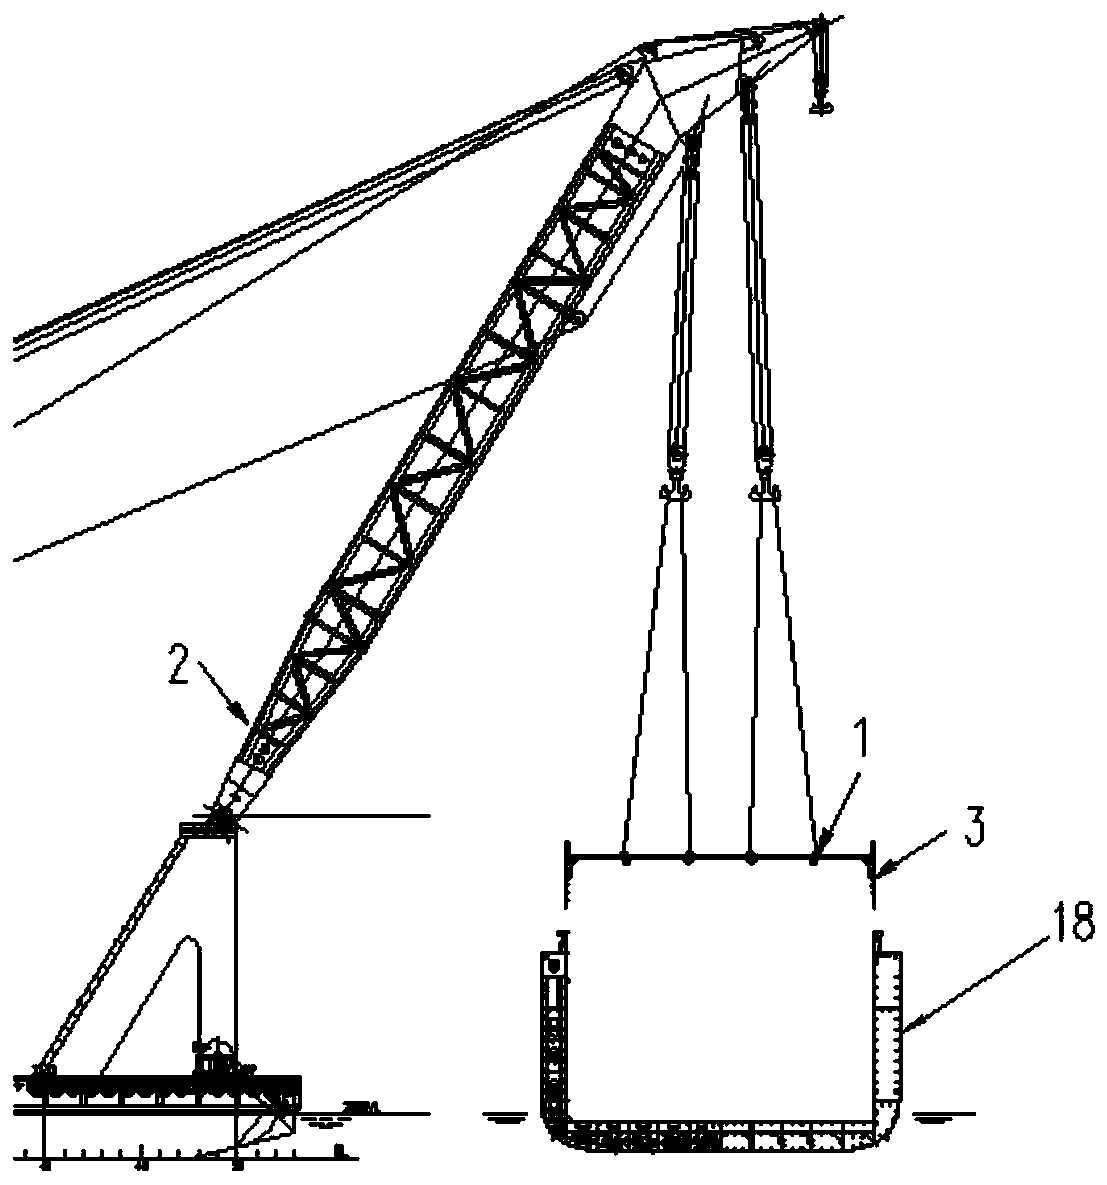 Hoisting Technology of the General Section of the Deck of the Orange Juice Ship